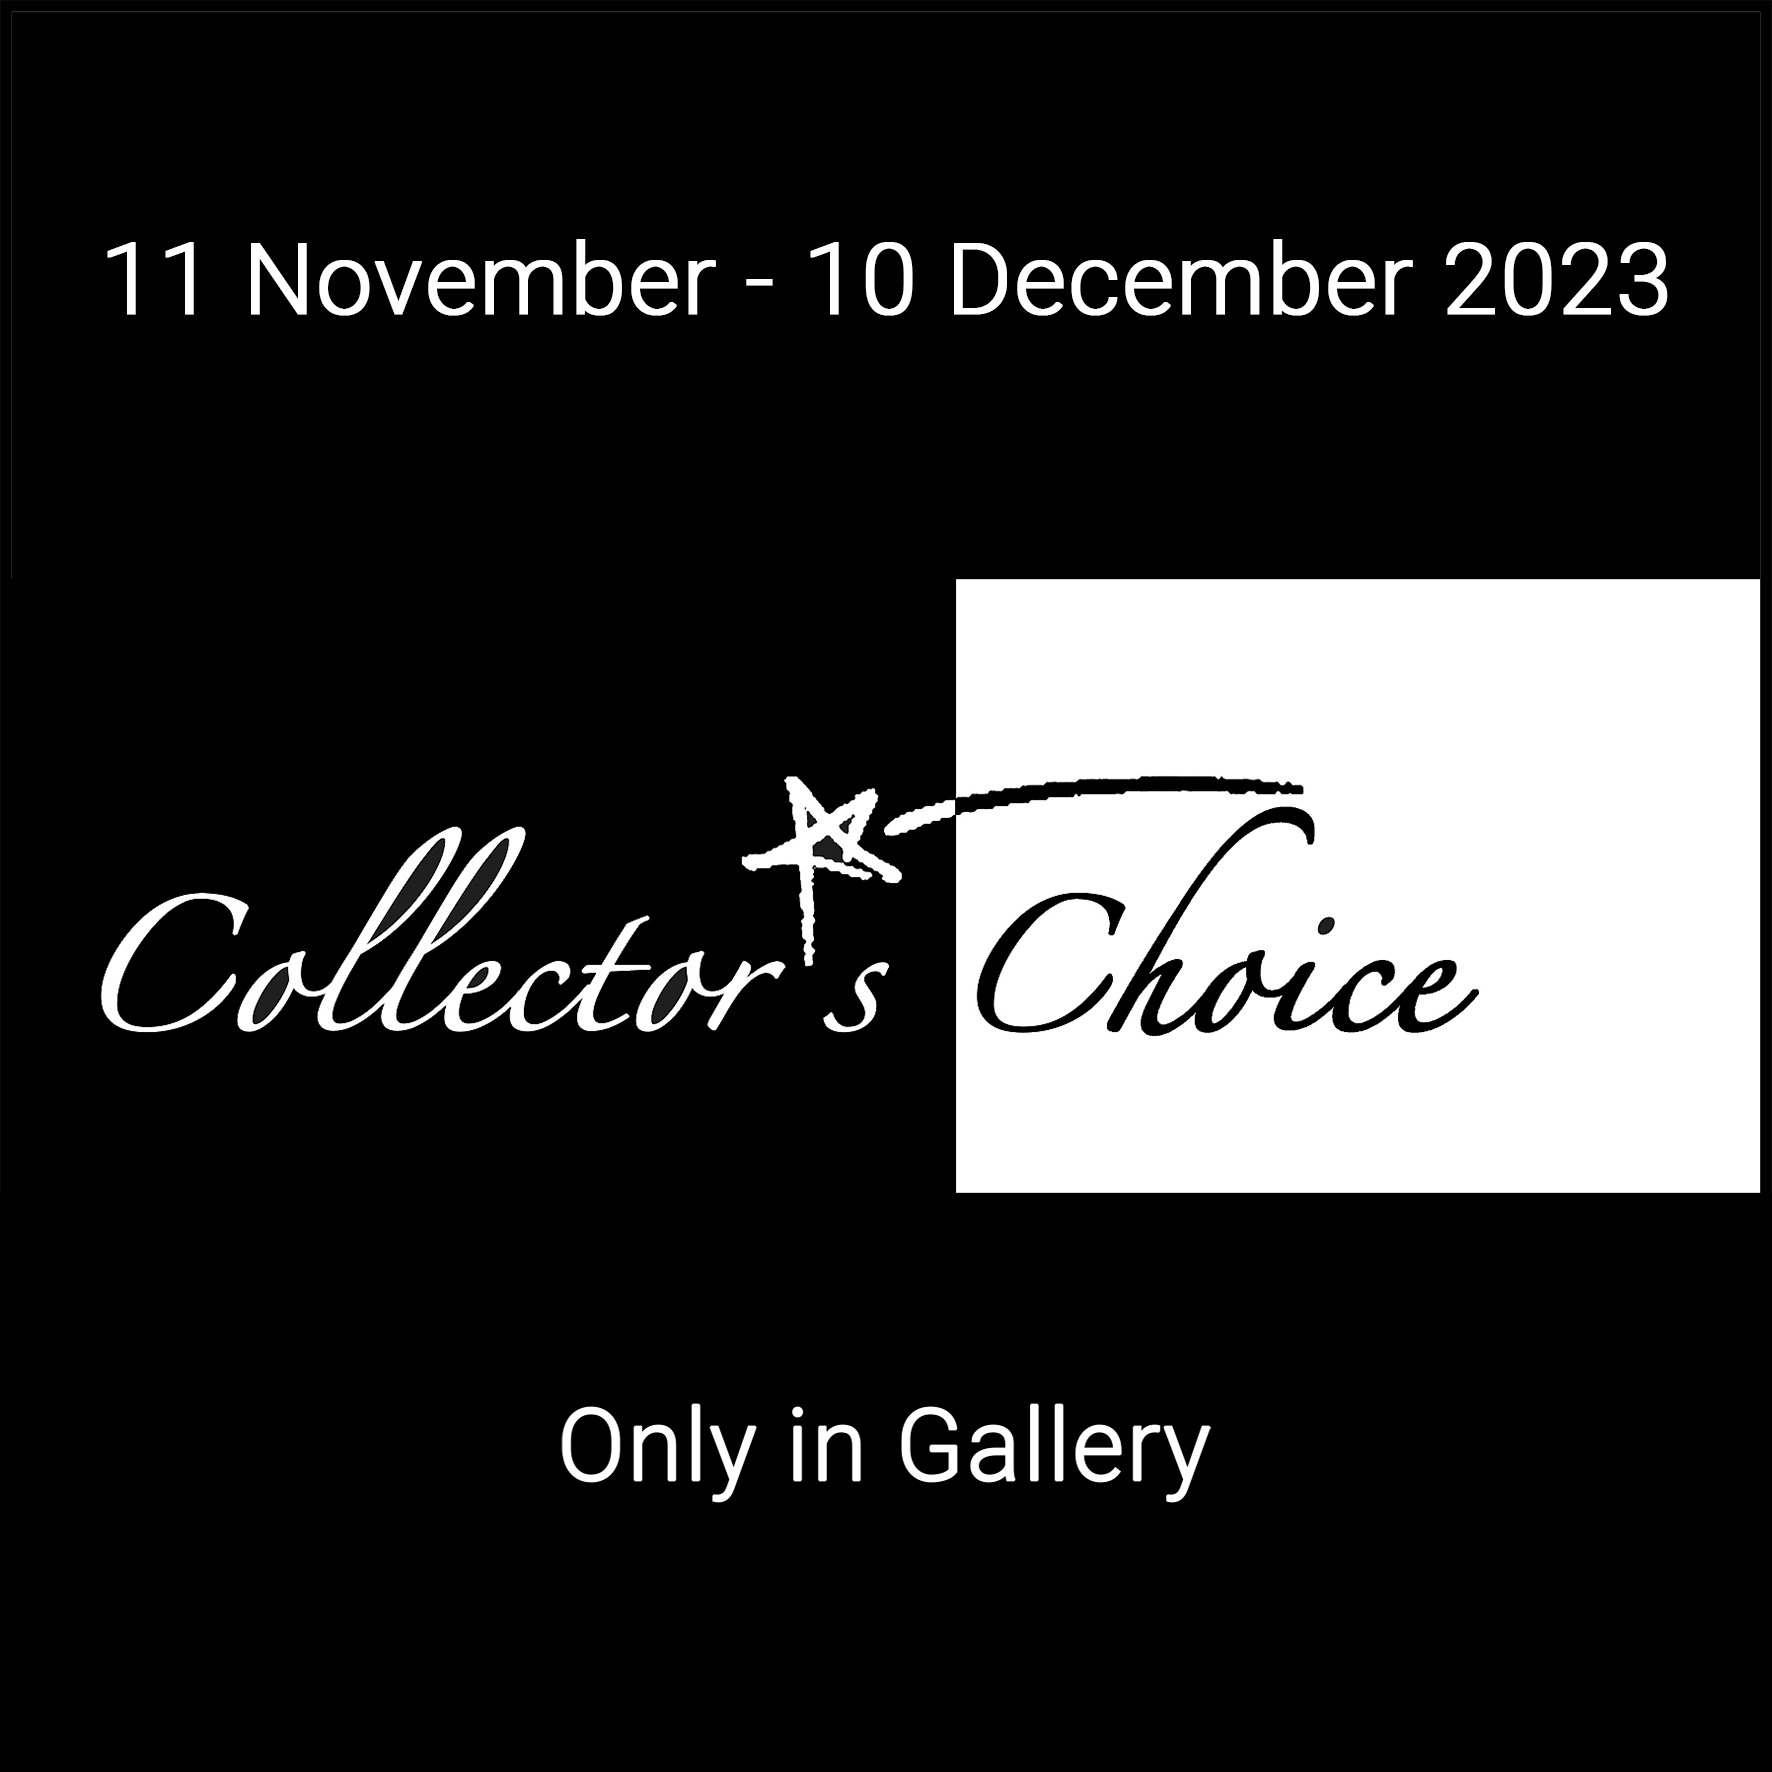 Annual Collectors Choice 2023 exhibition. In Gallery only. 11 November - 10 December 2023. 11am-5pm Thursdays to Sundays.